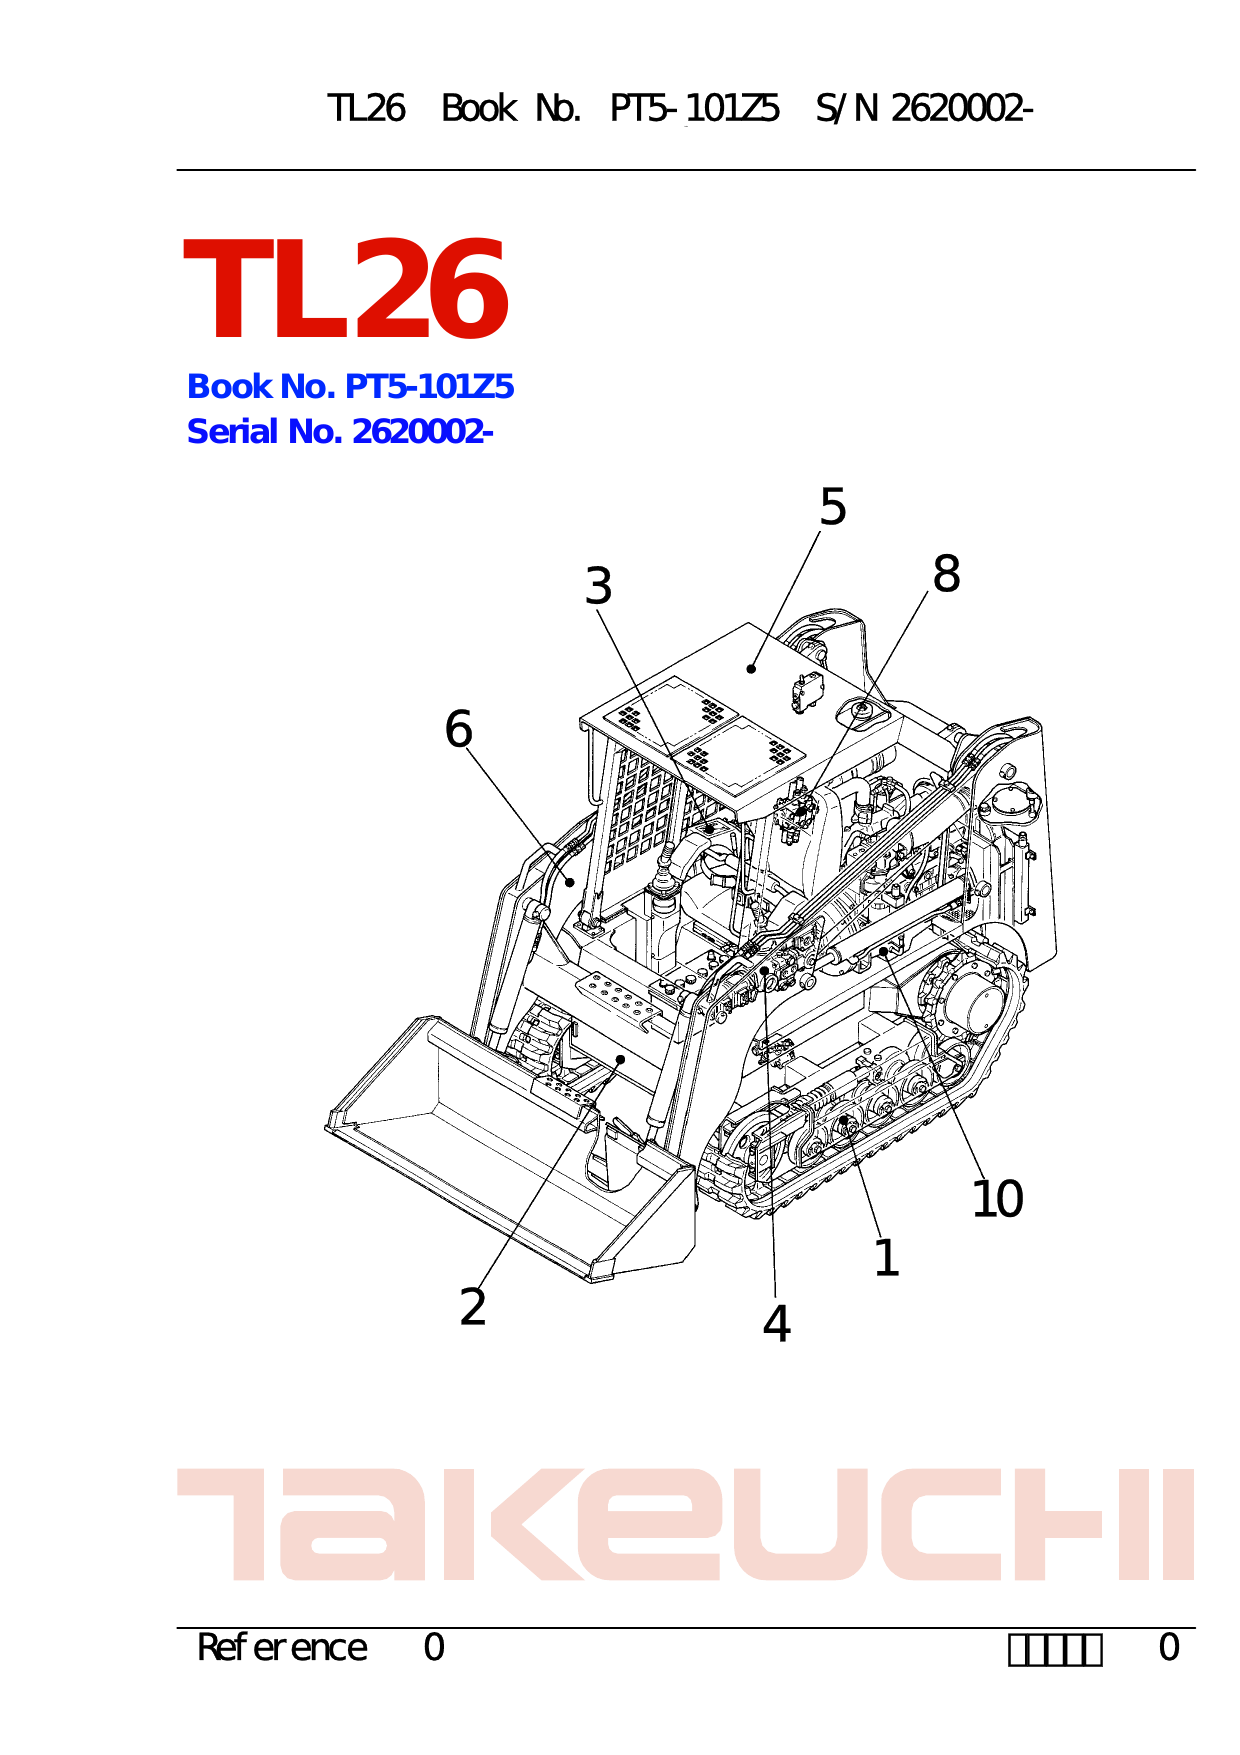 Takeuchi TL26 compact track loader (CTL)  parts catalog Preview image 2